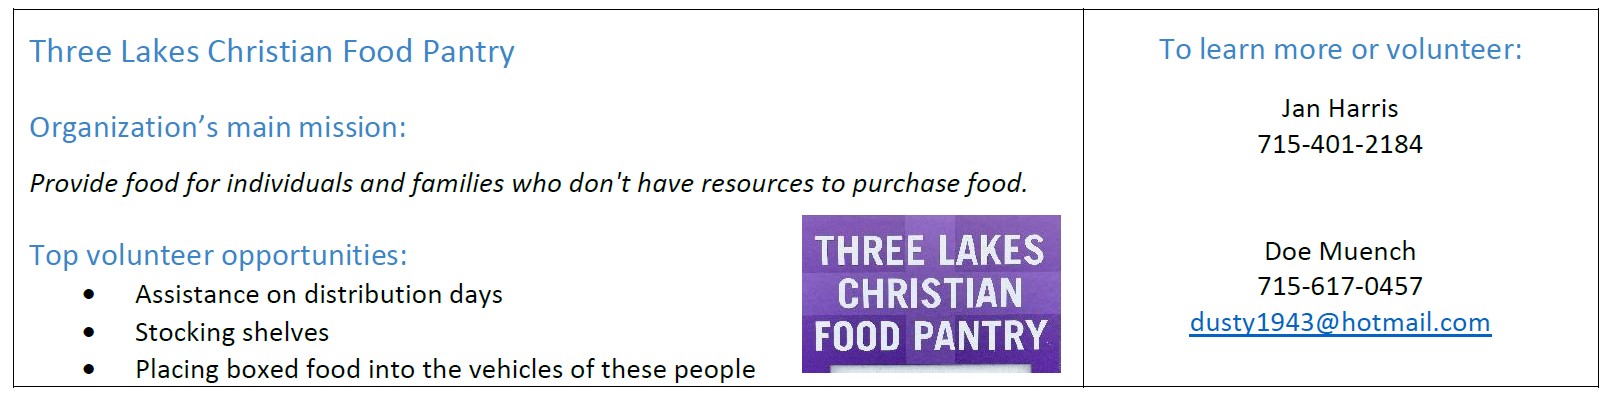 Volunteer opportunities at the Three Lakes Christian Food Pantry